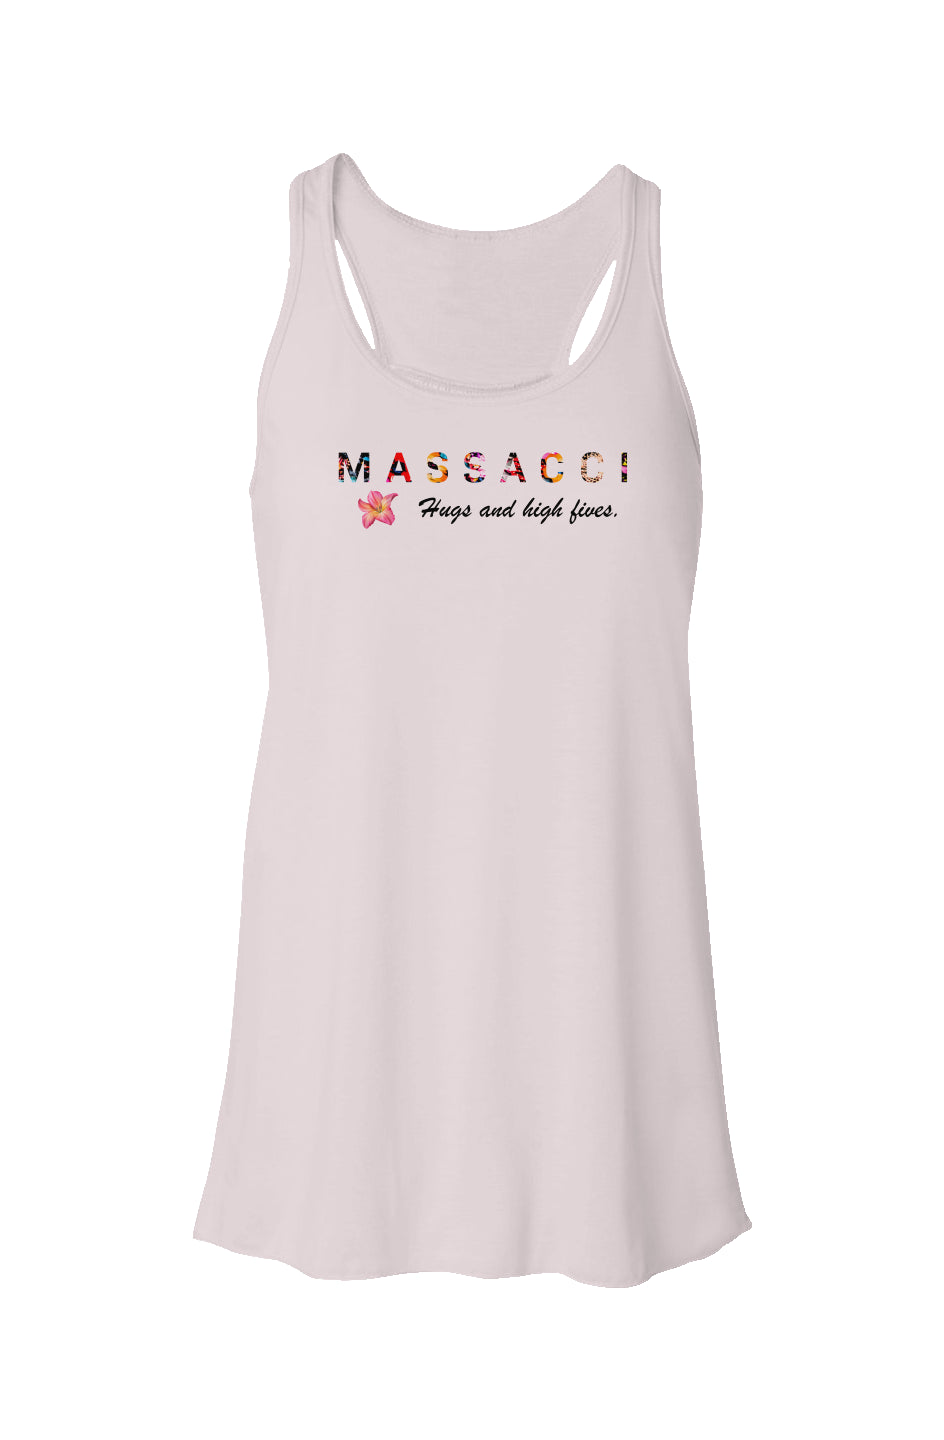 Hugs and High fives, Flowy Racerback Tank